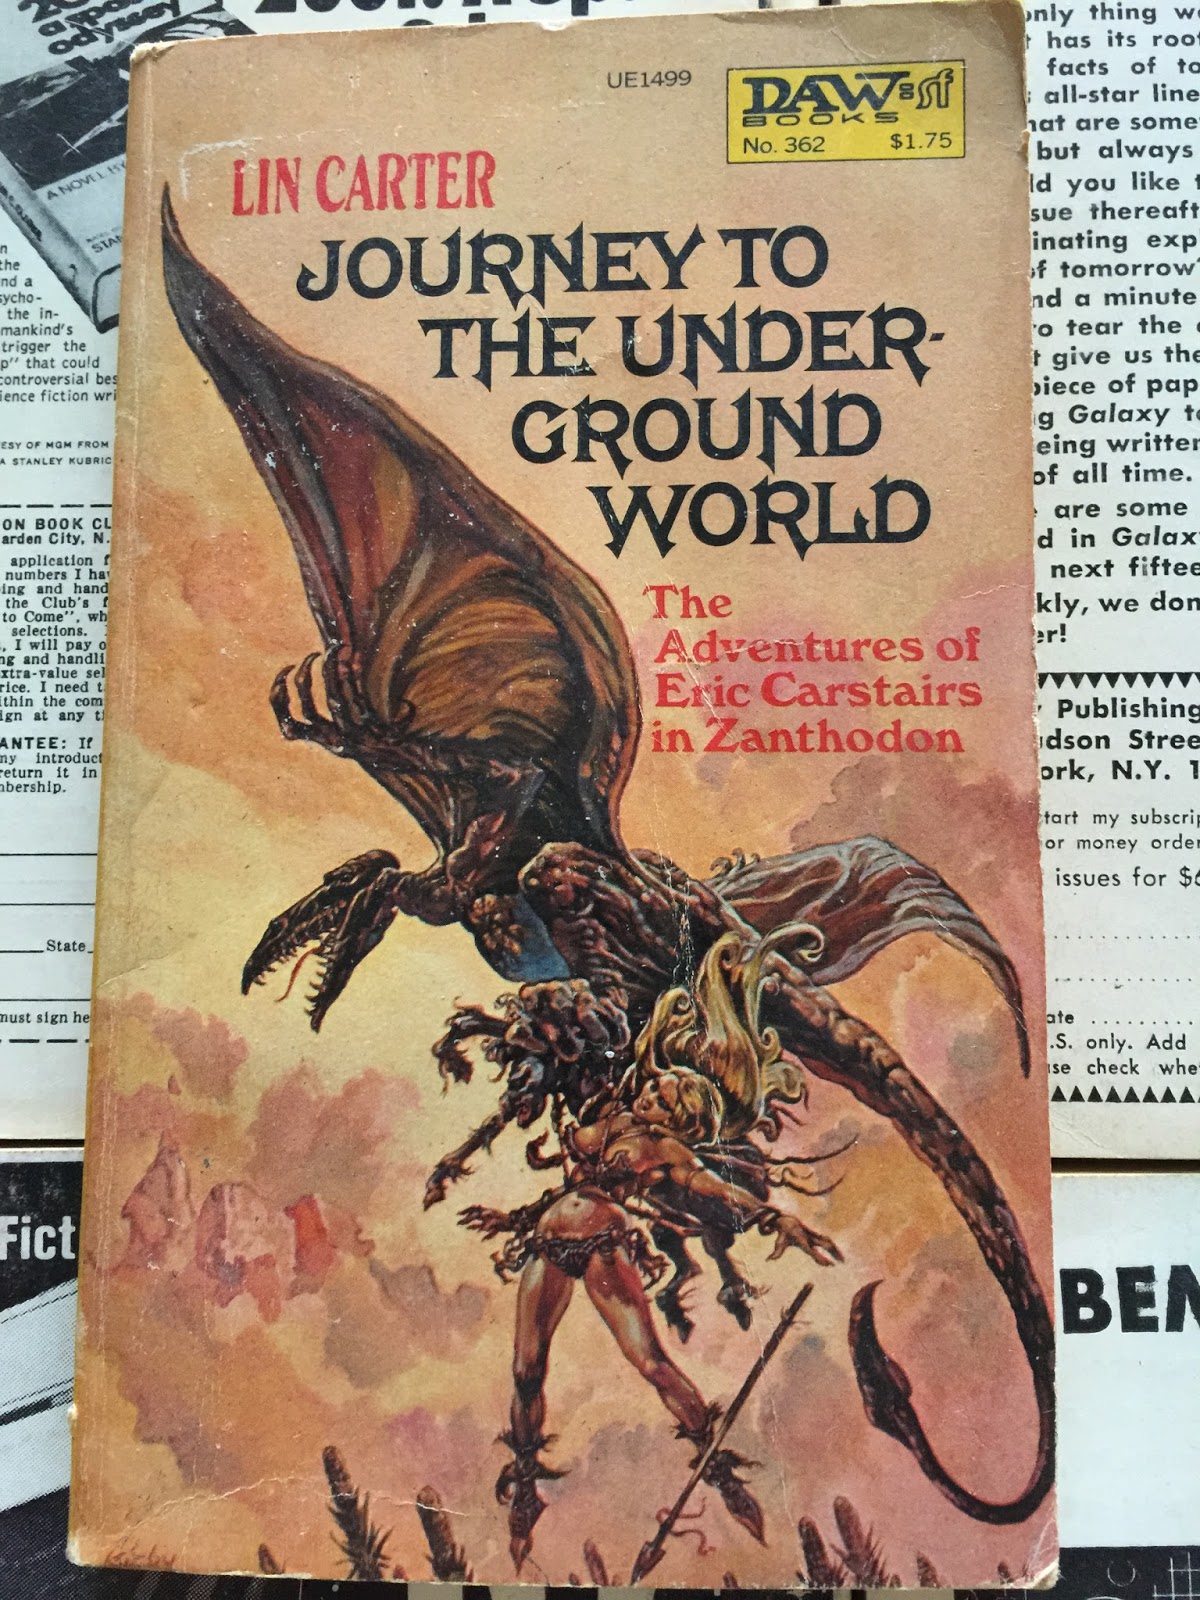 First Edition Fantasy: Vintage Science Fiction Book Covers: Part 2